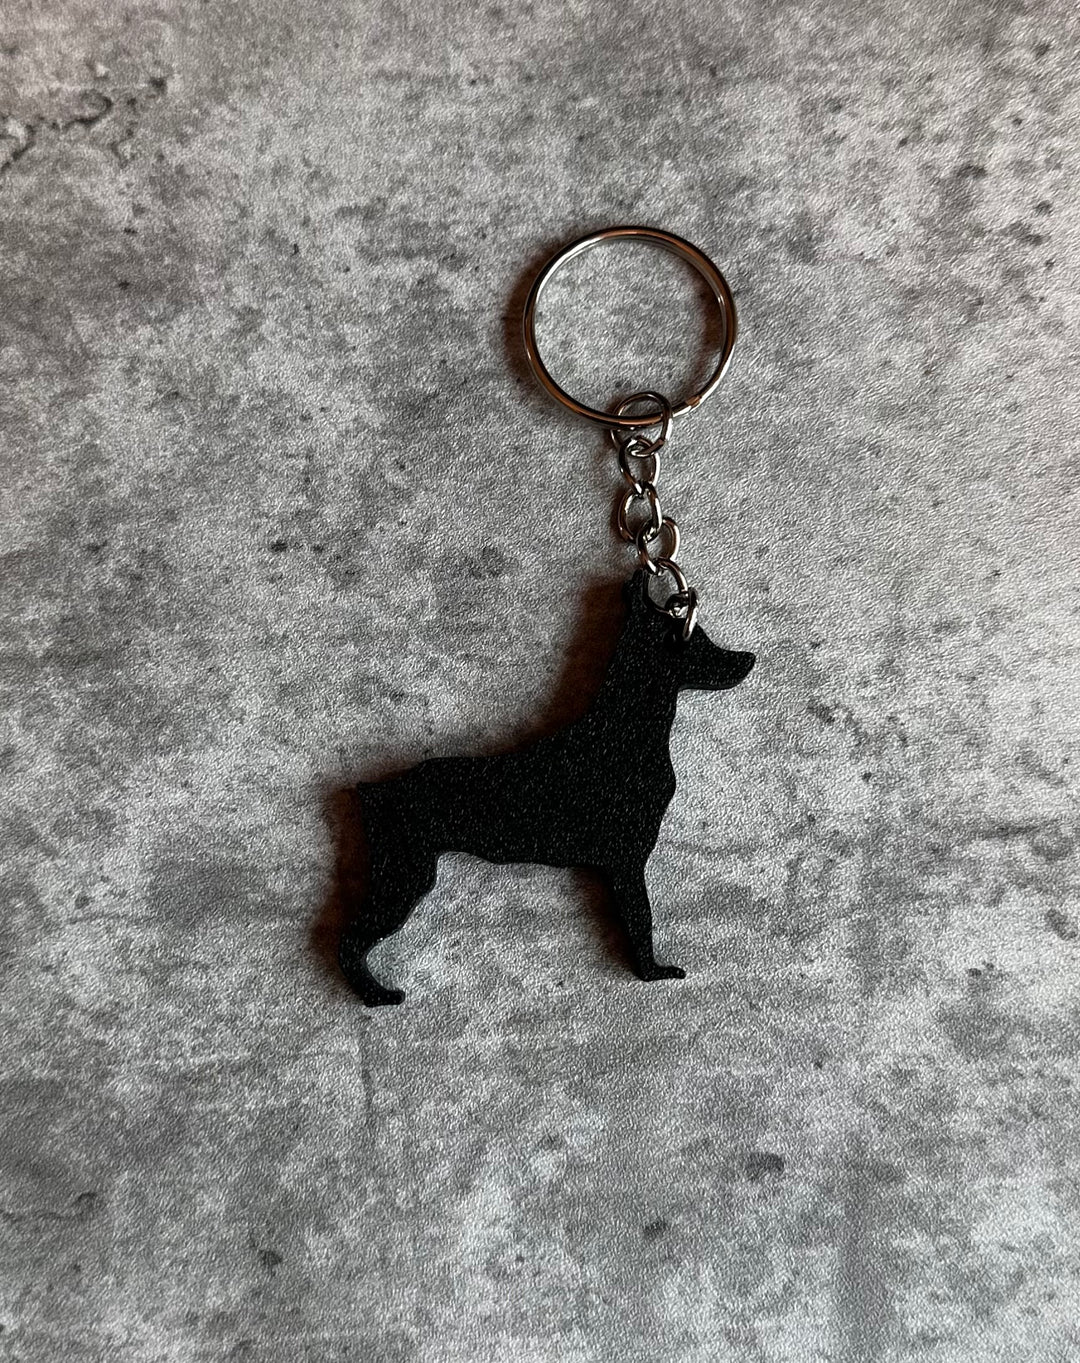 Miniature Pincsher Keyring Stl File | 3D Printed | Unique Personalised Gifts